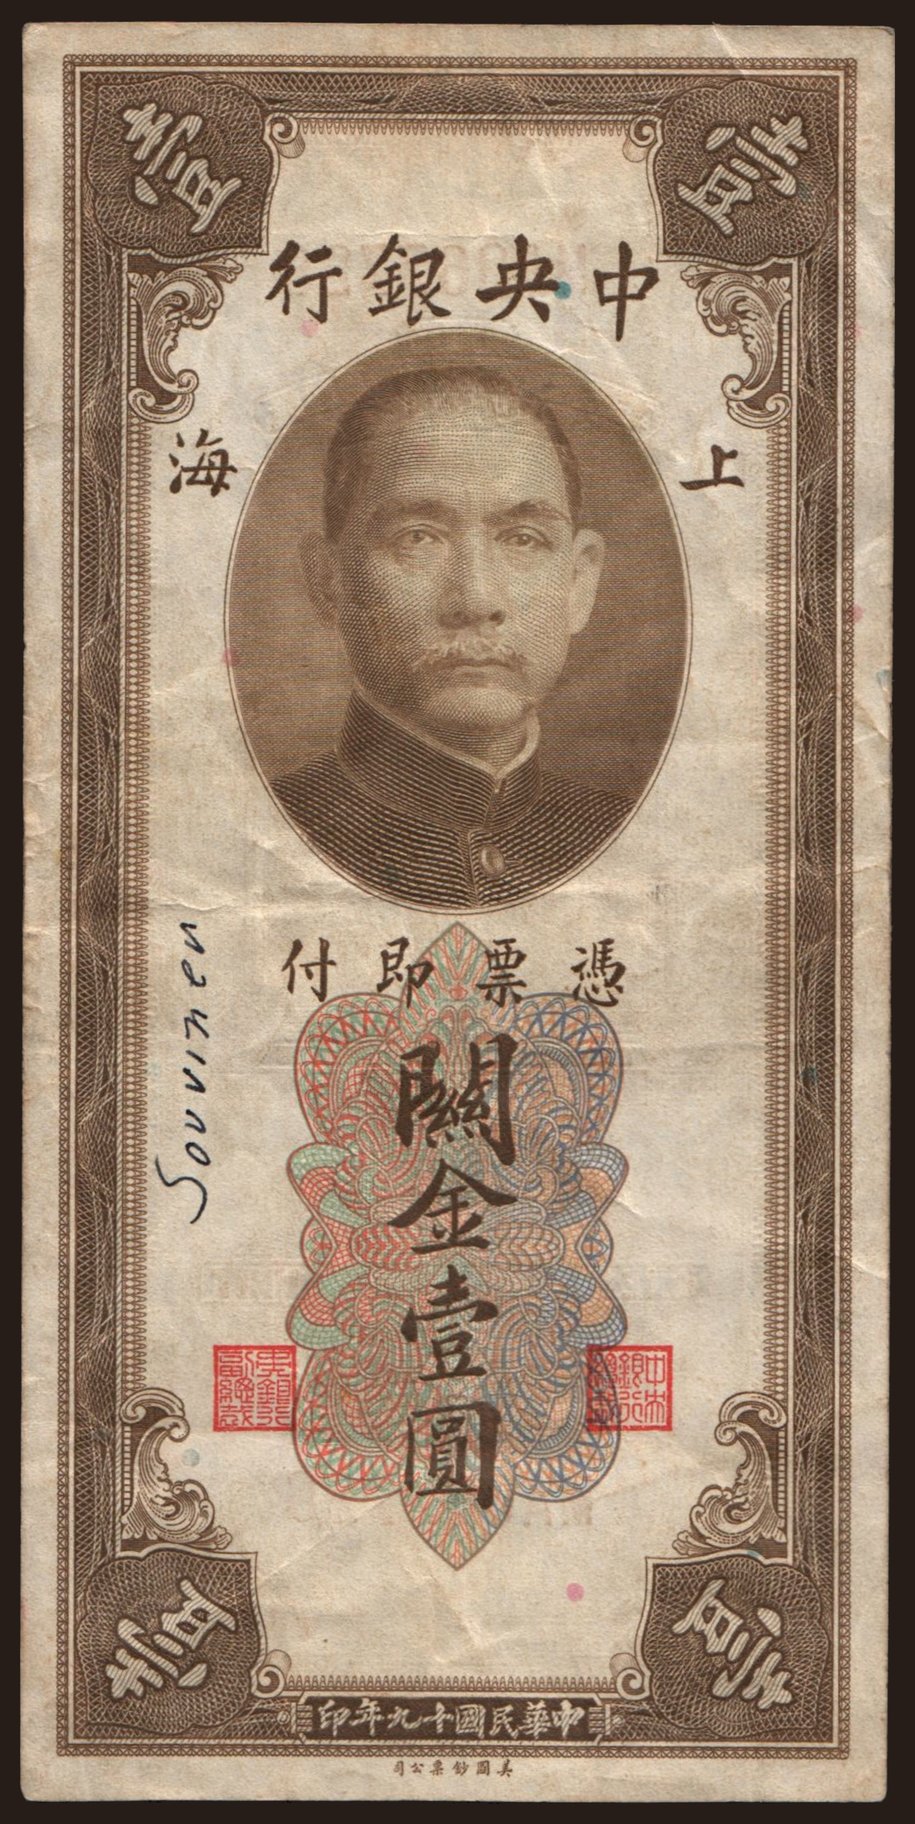 Central Bank of China, 1 gold unit, 1930